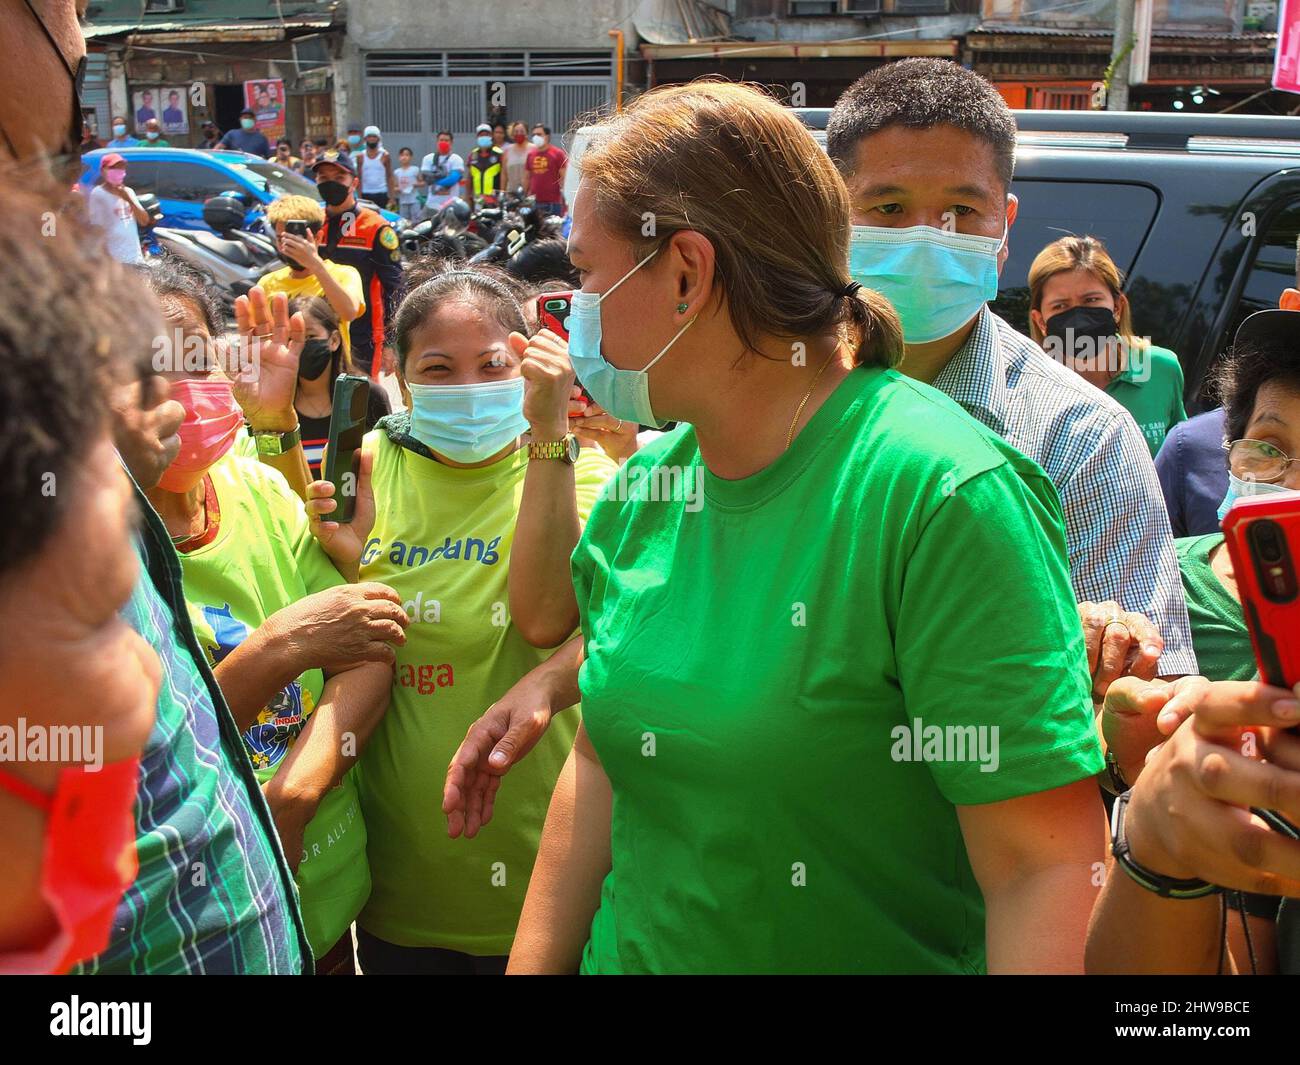 Mayor Sara Duterte-Carpio walks towards the Nazal compound in Navotas City. Presidential daughter and Davao City Mayor Sara Duterte-Carpio visit Navotas City. It is the UniTeam's northern Metro Manila campaign swing. The Vice Presidential aspirant was also the chairperson of the Lakas-Christian Muslim Democrats (CMD) party. Her Presidential running mate Ferdinand 'Bongbong' Marcos Jr. was not present because of a campaign sortie in the province of Sorsogon. Stock Photo